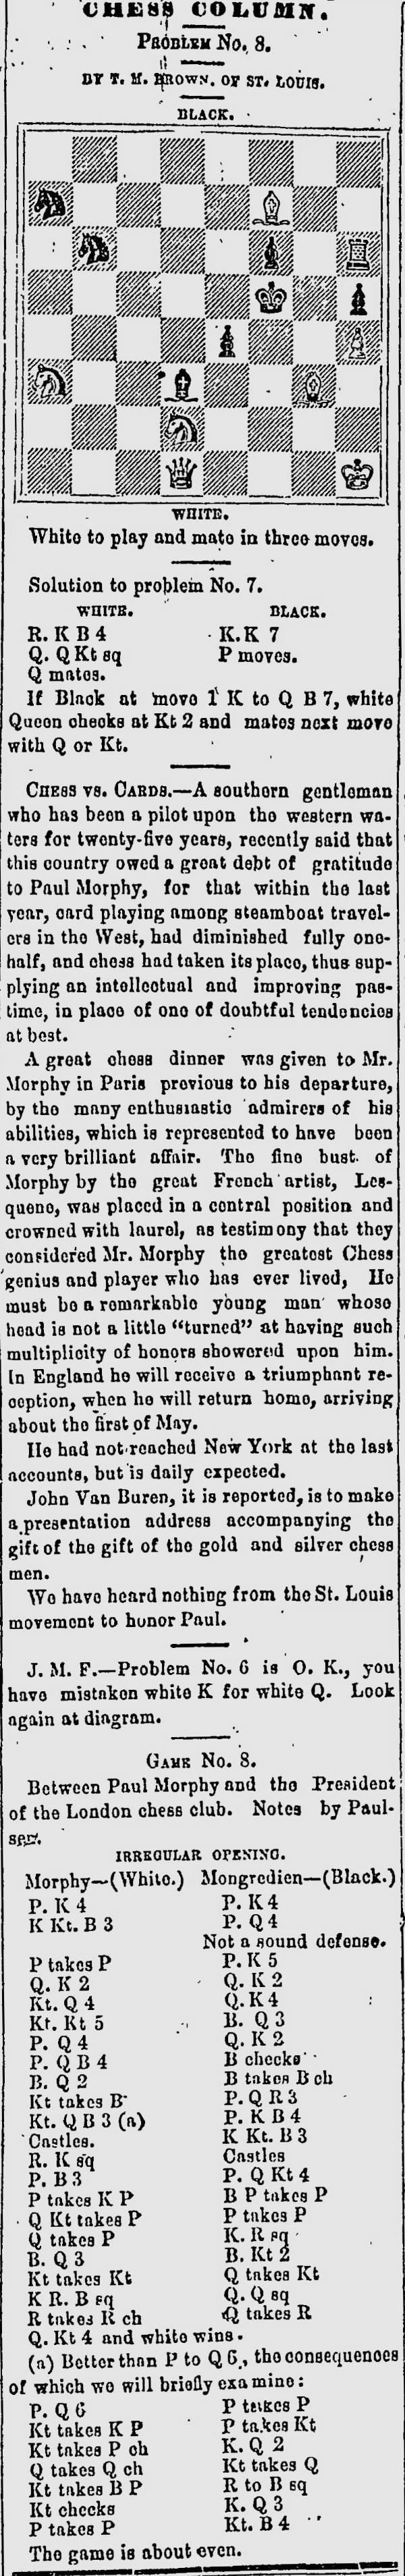 1859.05.06-01 Quincy Daily Whig.png